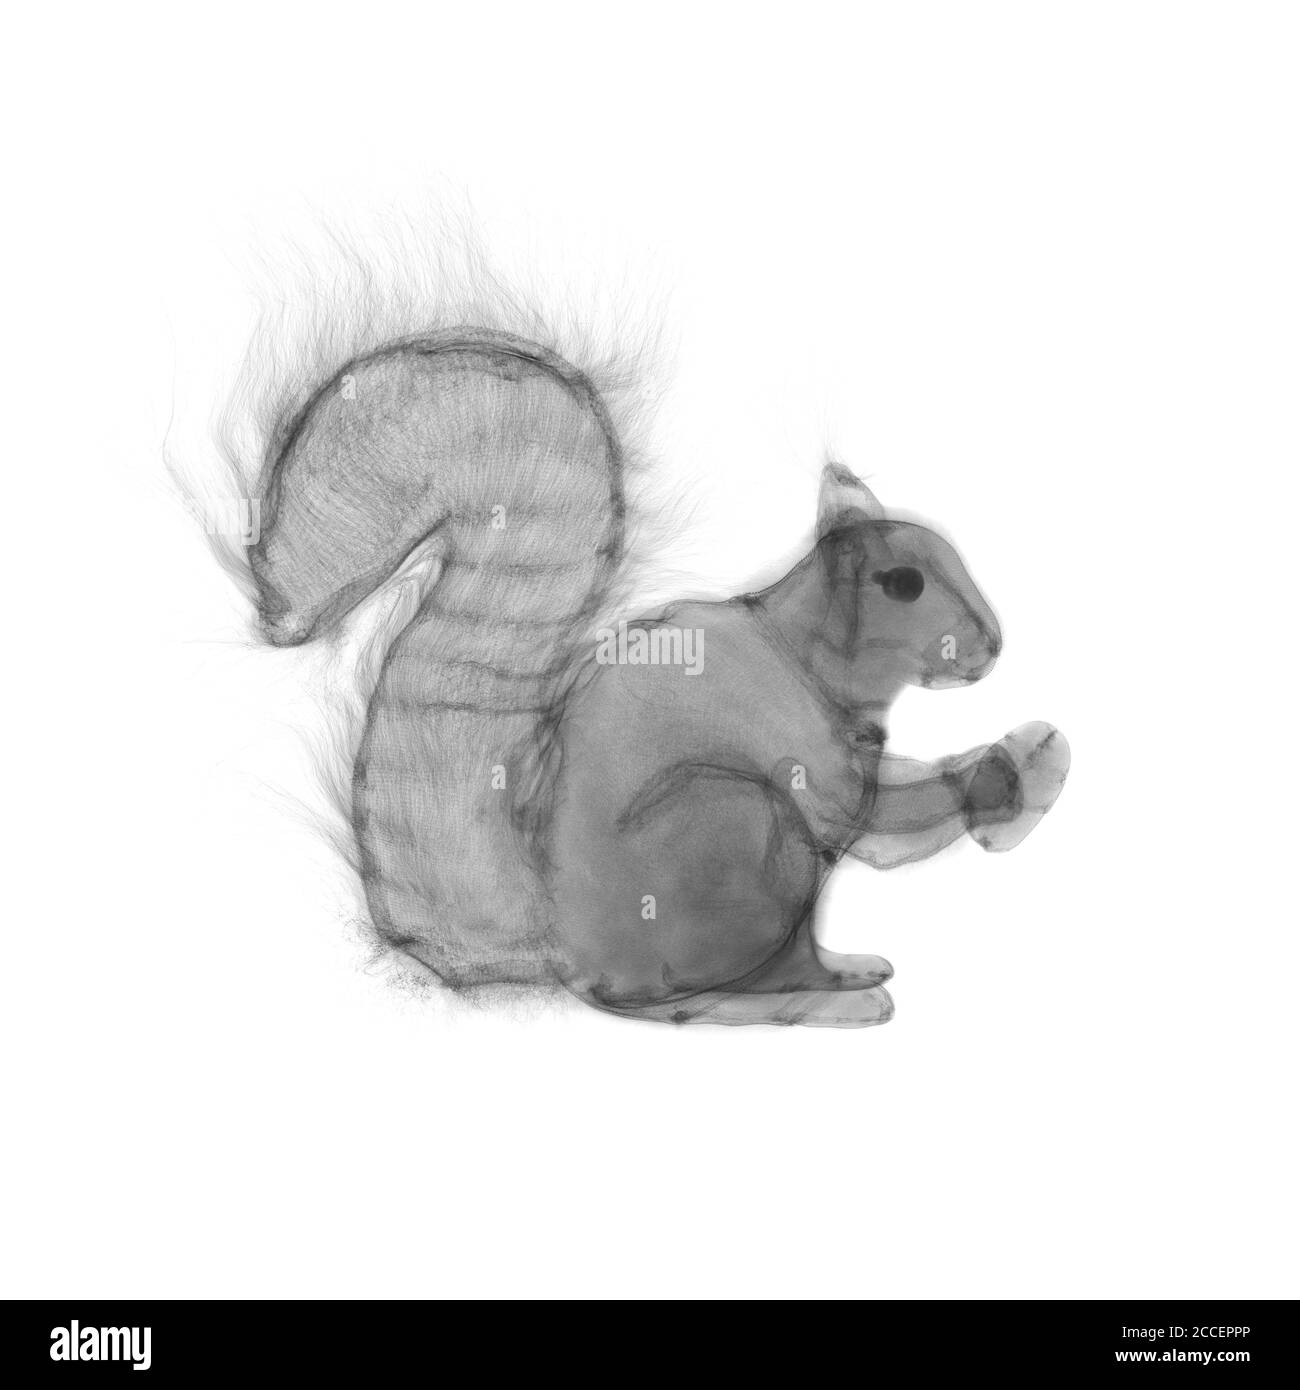 Toy squirrel, X-ray Stock Photo